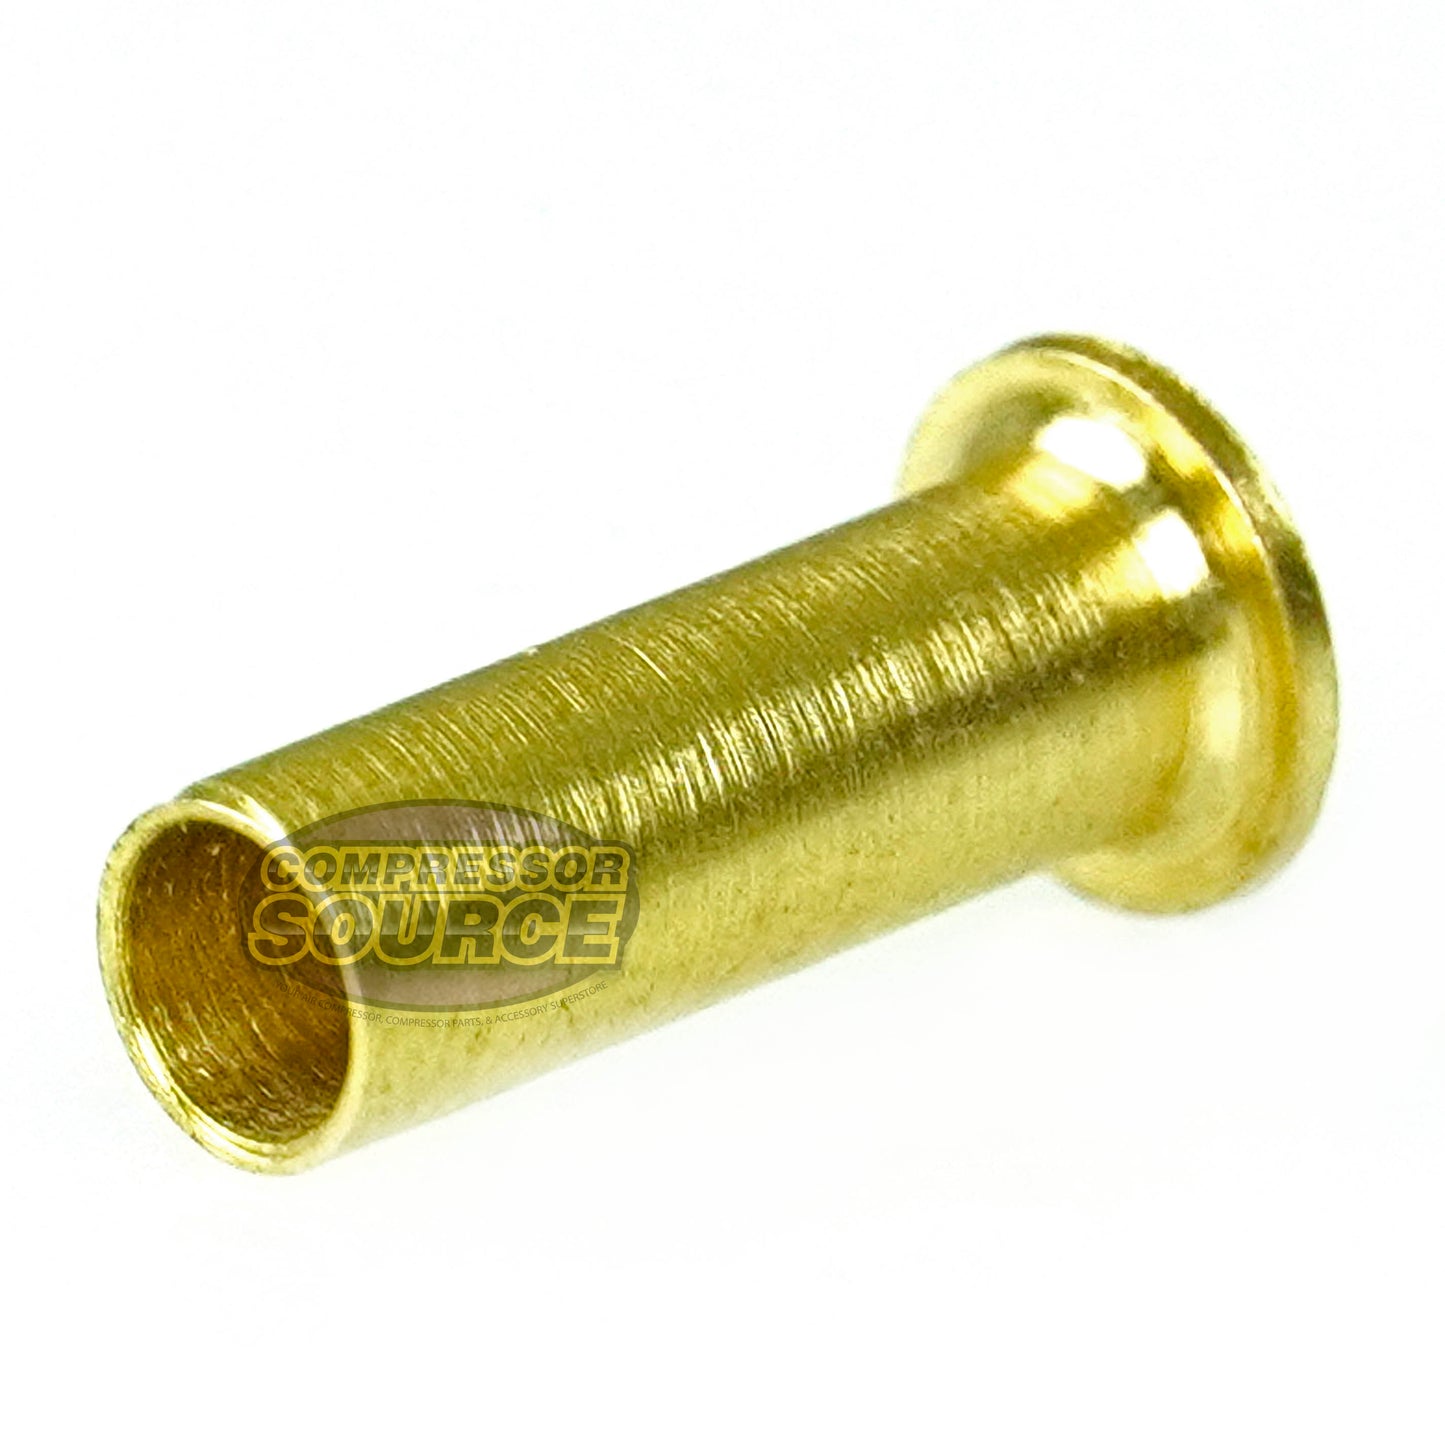 1/4" Brass Compression Insert Fitting for Air Water Fuel Oil Applications 5-Pack